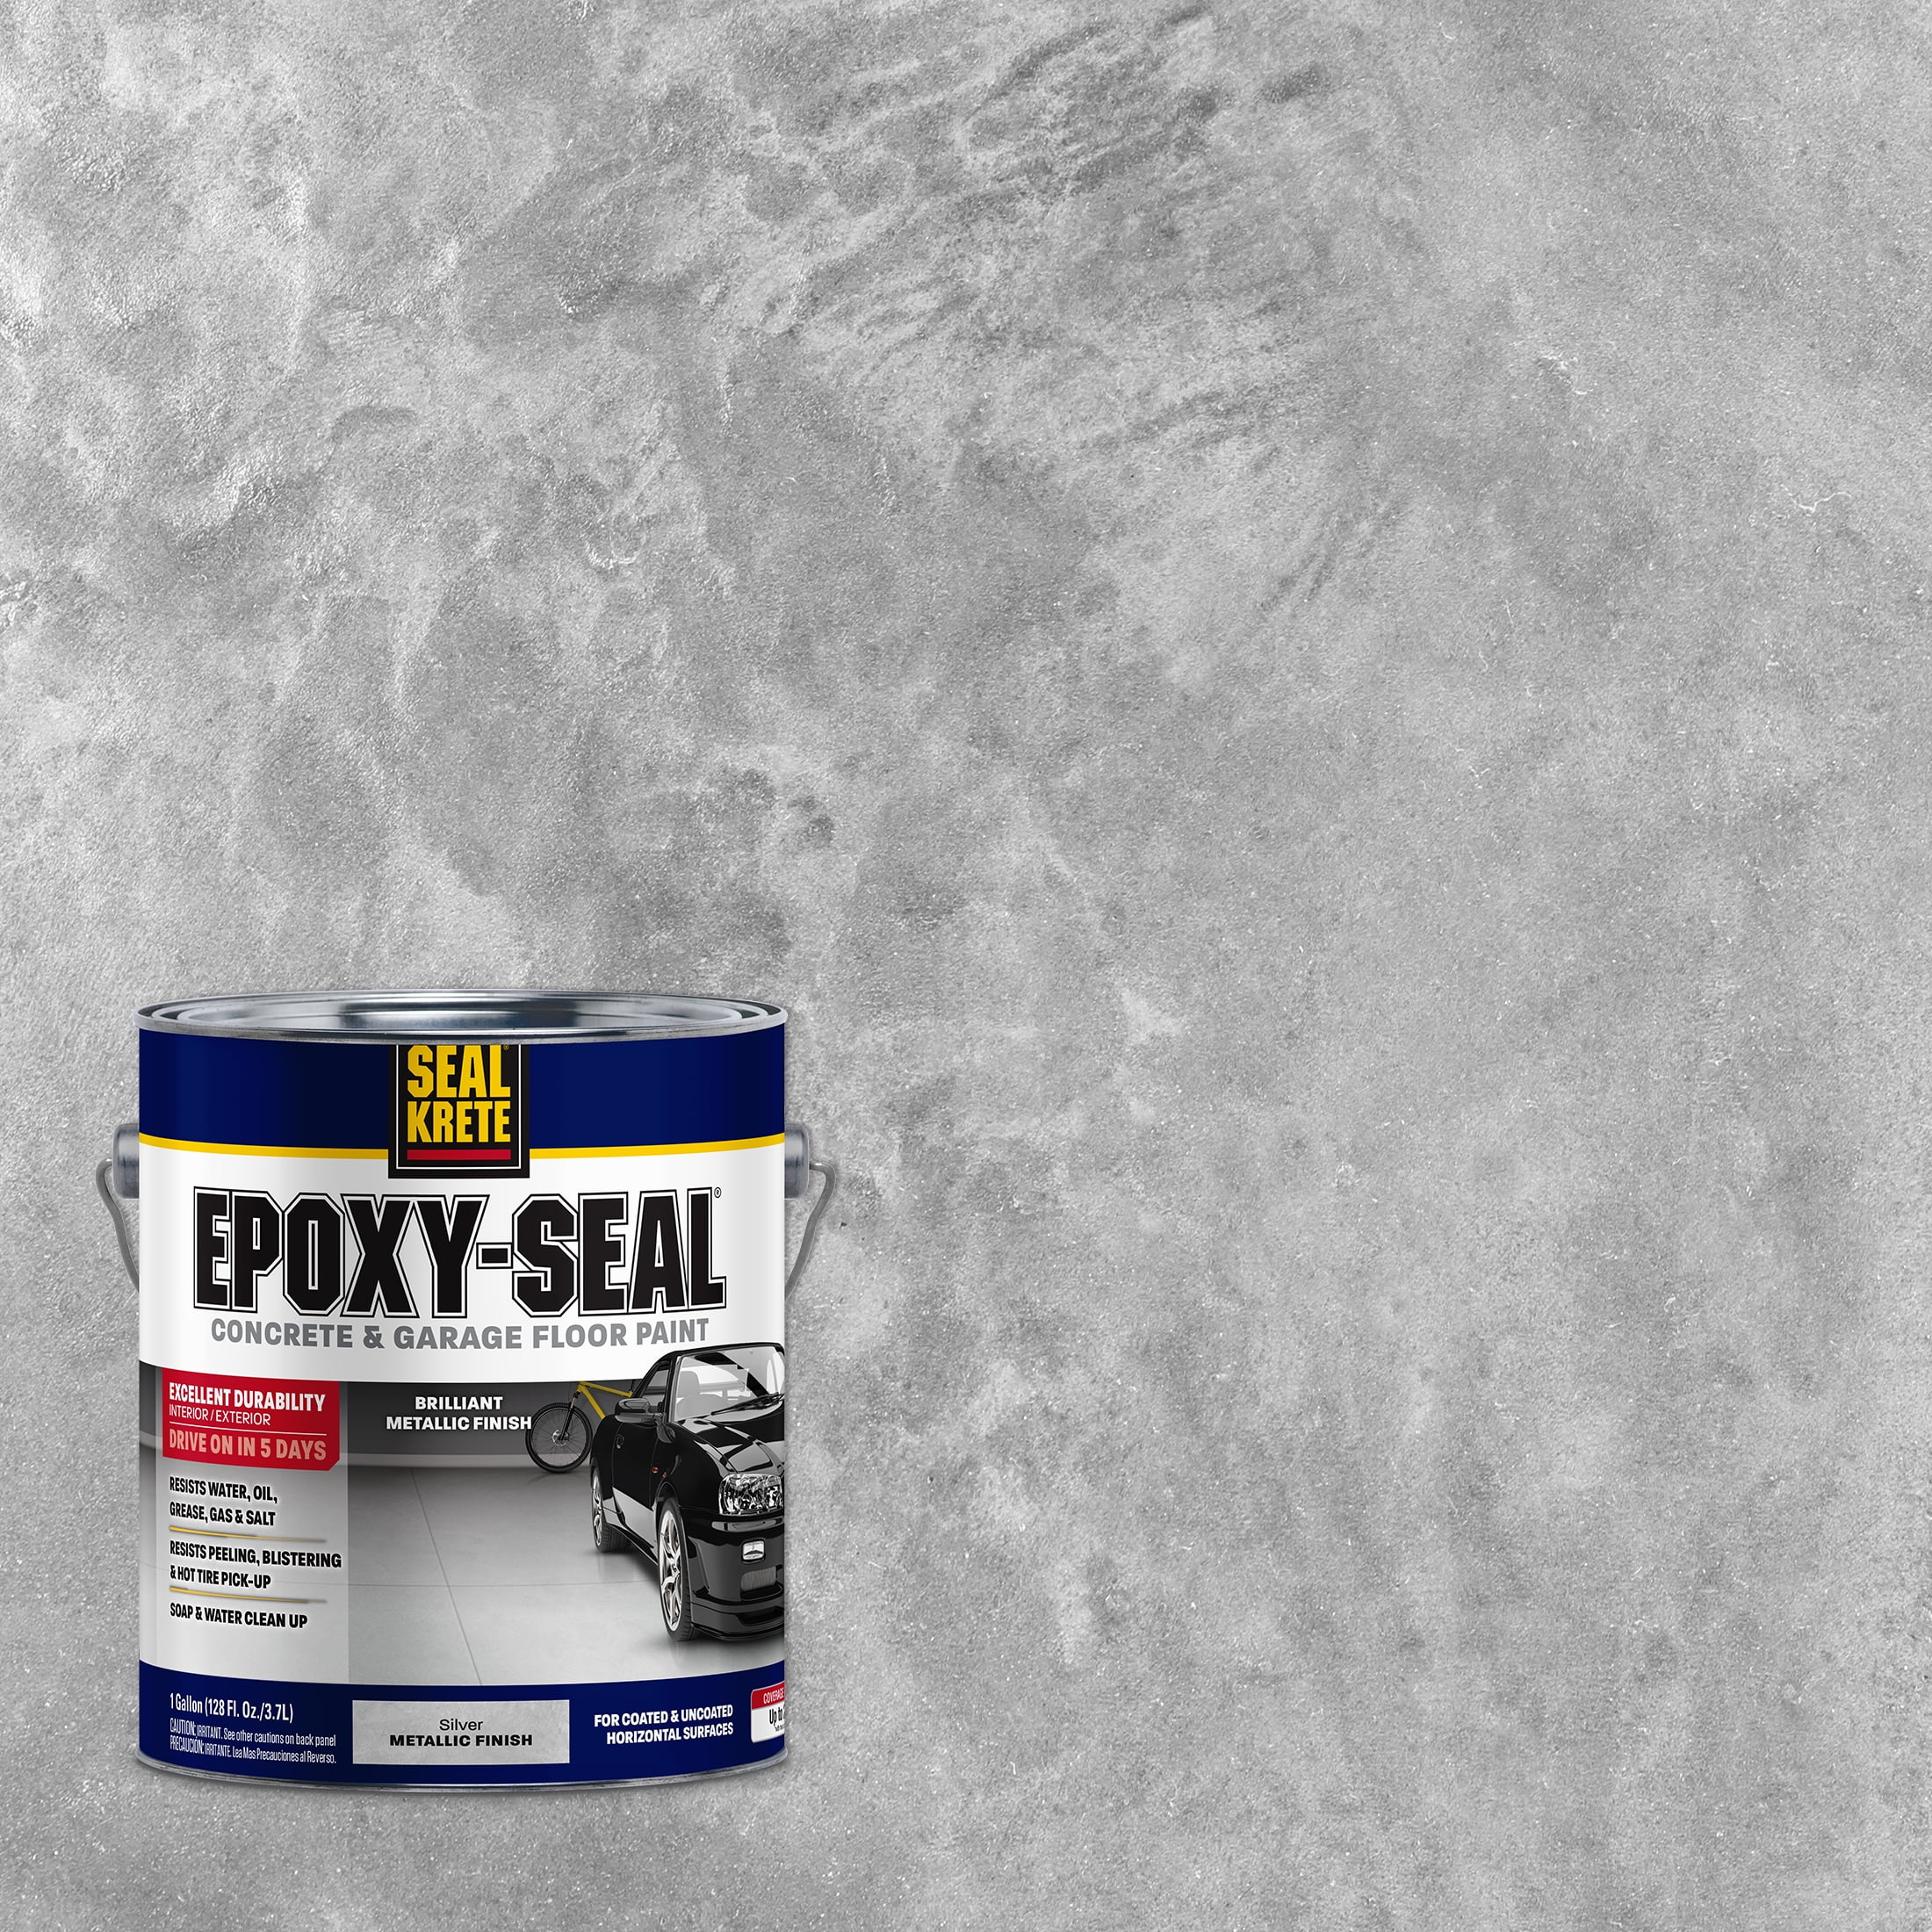 How To Paint A Concrete Floor and Seal a Concrete Floor